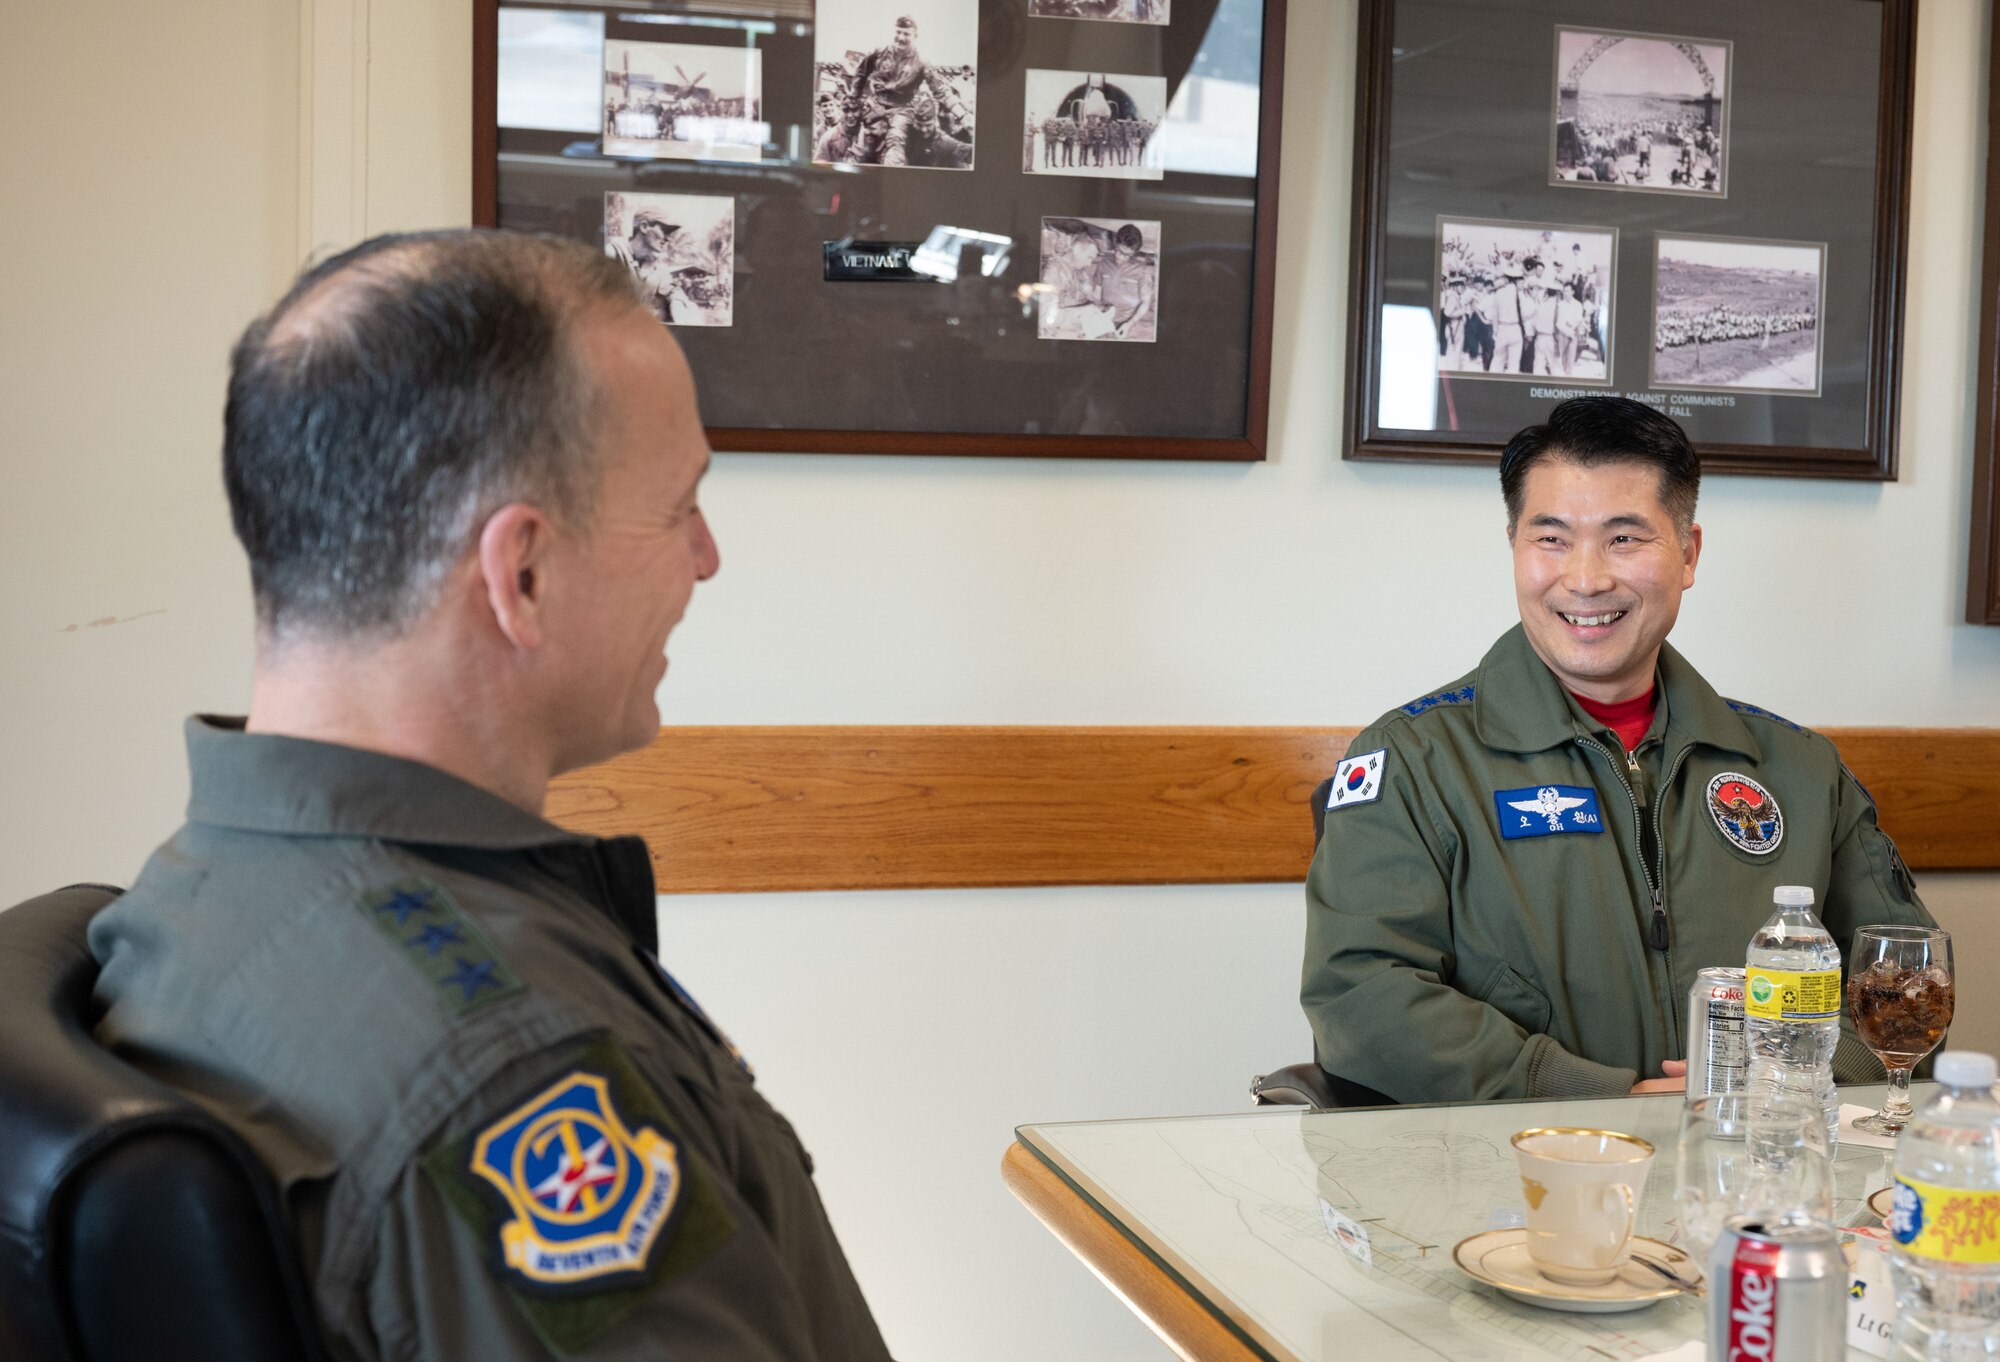 U.S. Air Force Lt. Gen. Scott L. Pleus, 7th Air Force commander, talks with Republic of Korea Air Force Col. Oh Choong-Won, 38th Fighter Group commander, at Kunsan Air Base, Republic of Korea, Jan. 25, 2023. During their visit, both commanders spoke with 8th Fighter Wing leaders to discuss how they can partner together to improve quality-of-life for the Wolf Pack to support the Airmen behind the mission. (U.S. Air Force photo by Staff Sgt. Sadie Colbert)